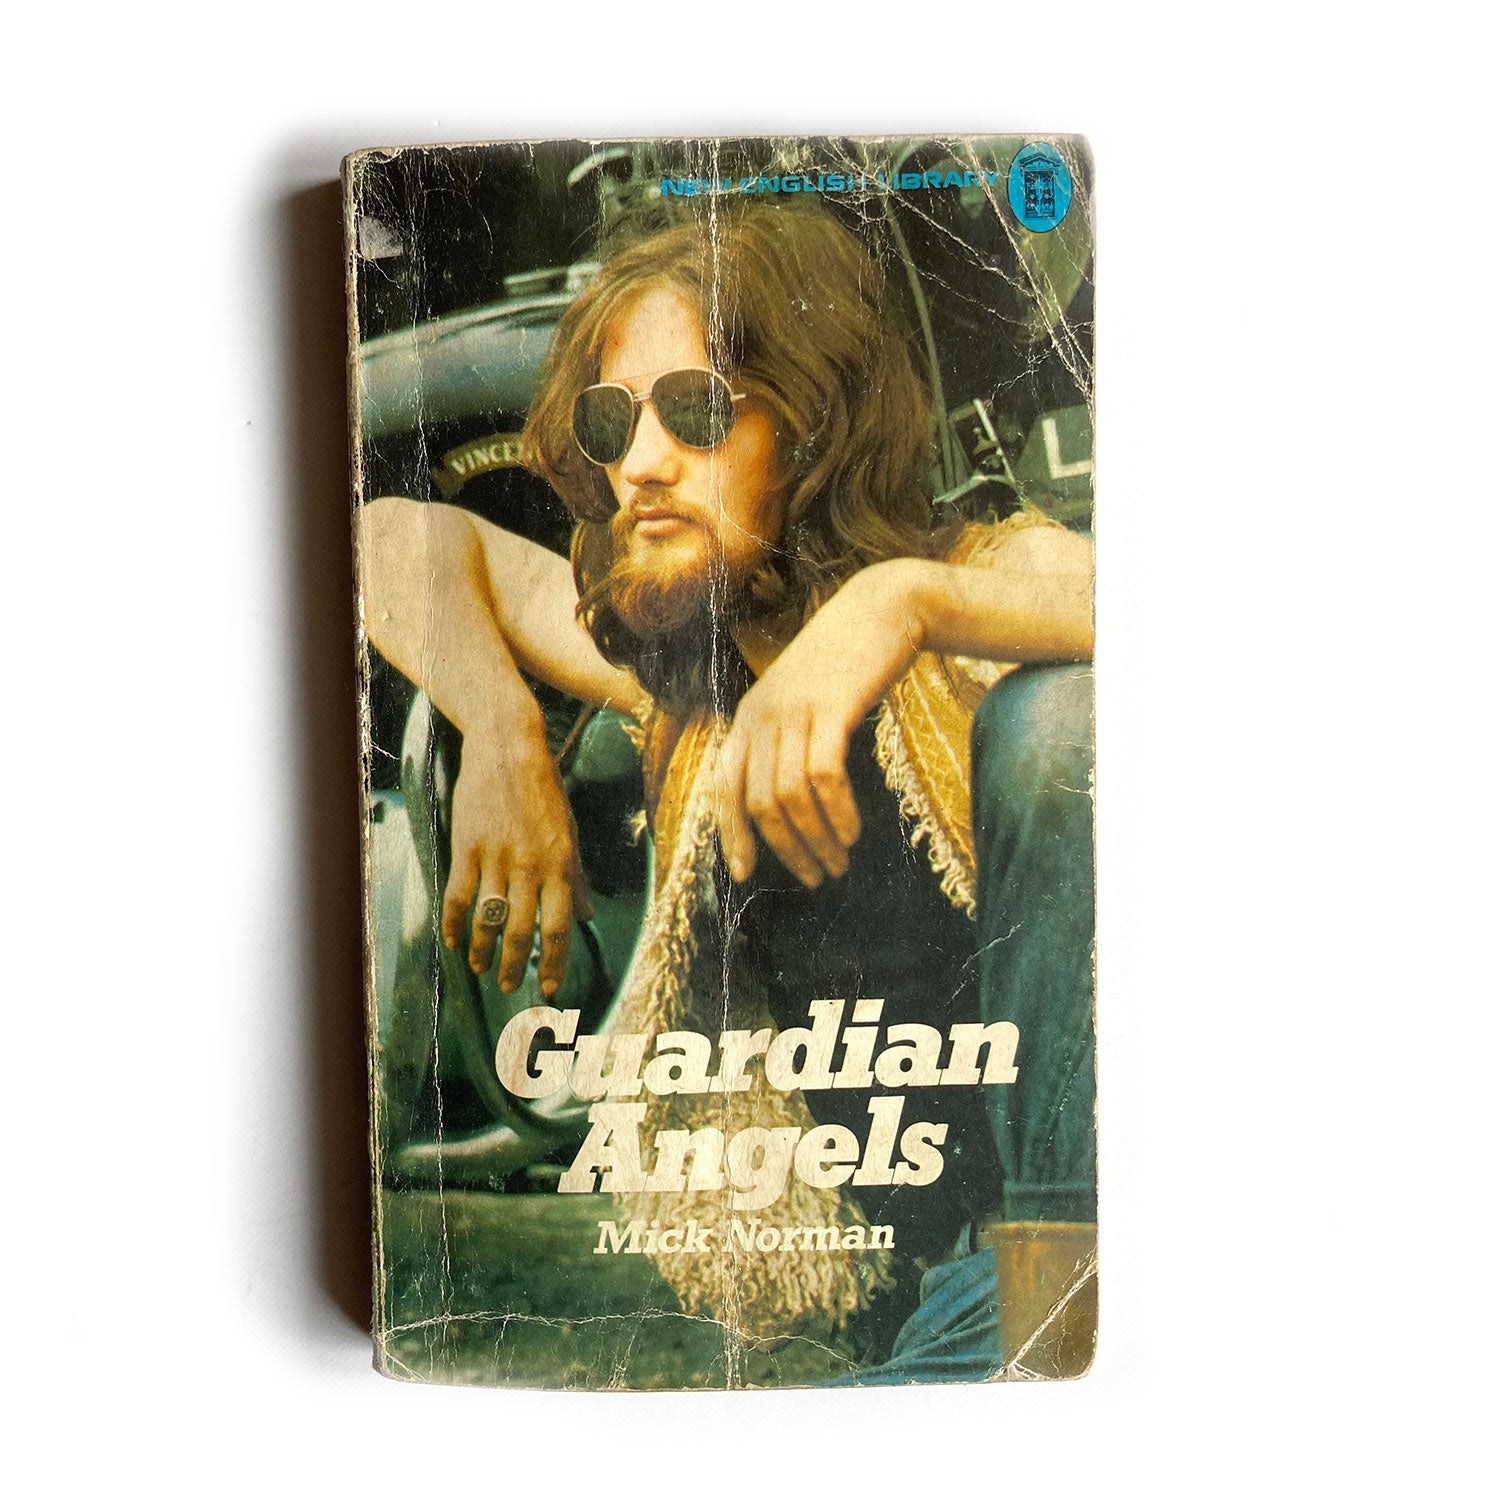 Guardian Angels by Mick Norman, first edition New English Library paperback, 1974